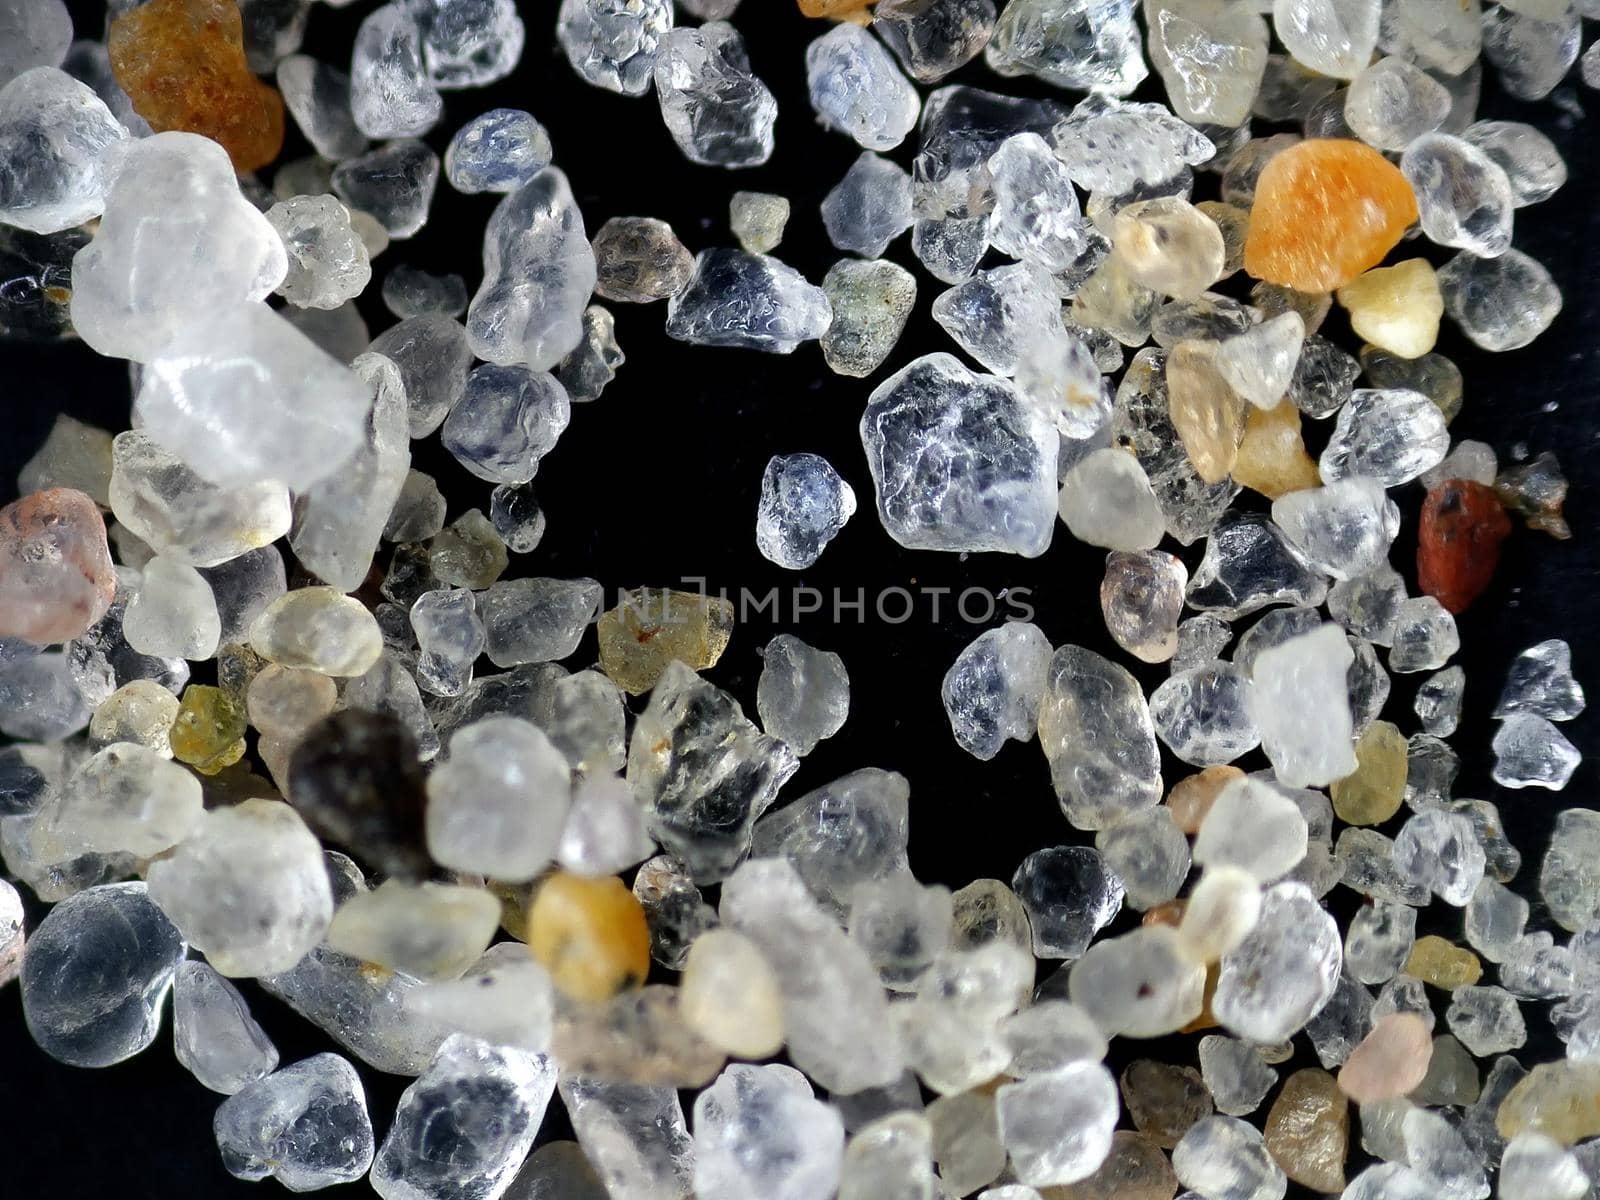 grains of sand under a microscope